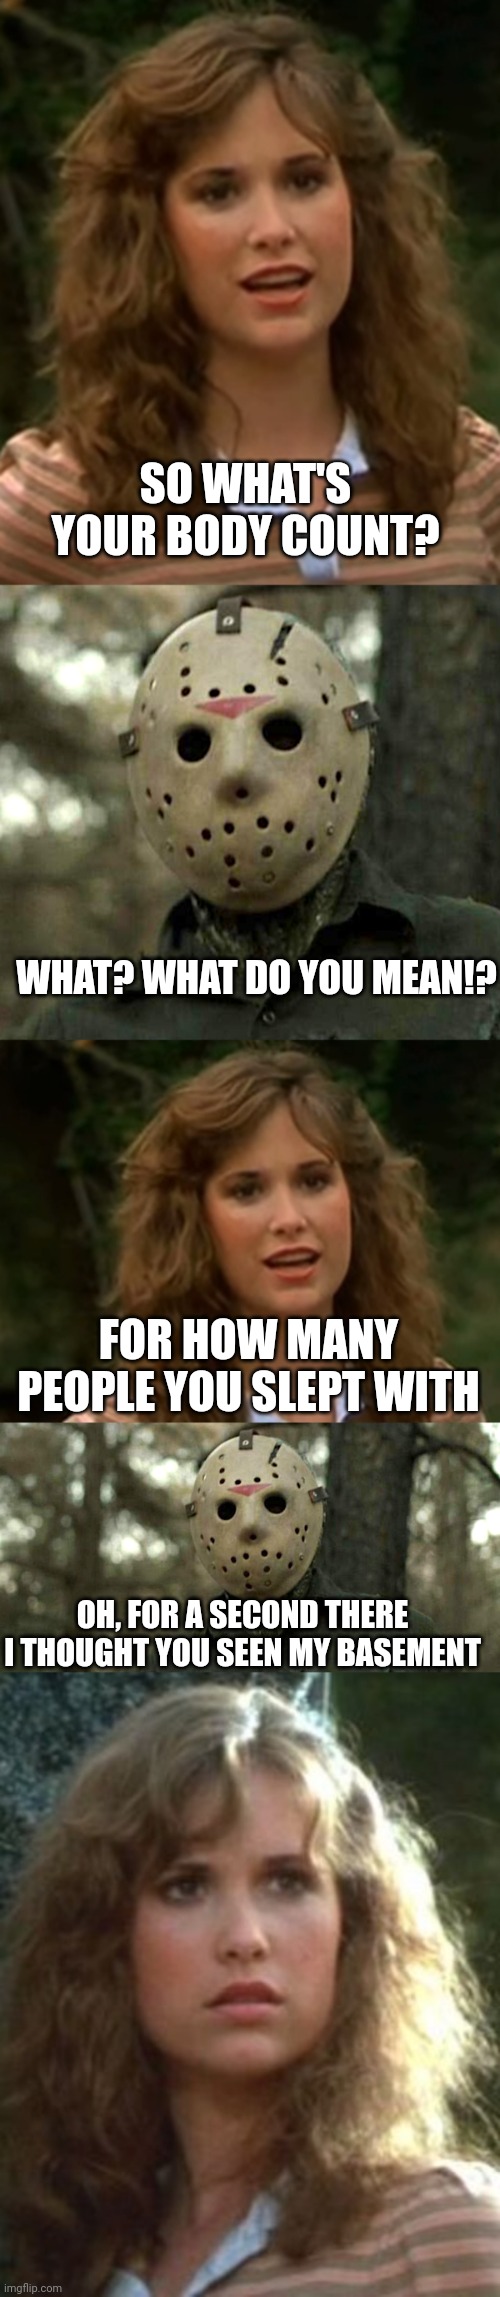 STAY AWAY FROM HIM | SO WHAT'S YOUR BODY COUNT? WHAT? WHAT DO YOU MEAN!? FOR HOW MANY PEOPLE YOU SLEPT WITH; OH, FOR A SECOND THERE I THOUGHT YOU SEEN MY BASEMENT | image tagged in jason voorhees,friday the 13th,dark humor | made w/ Imgflip meme maker